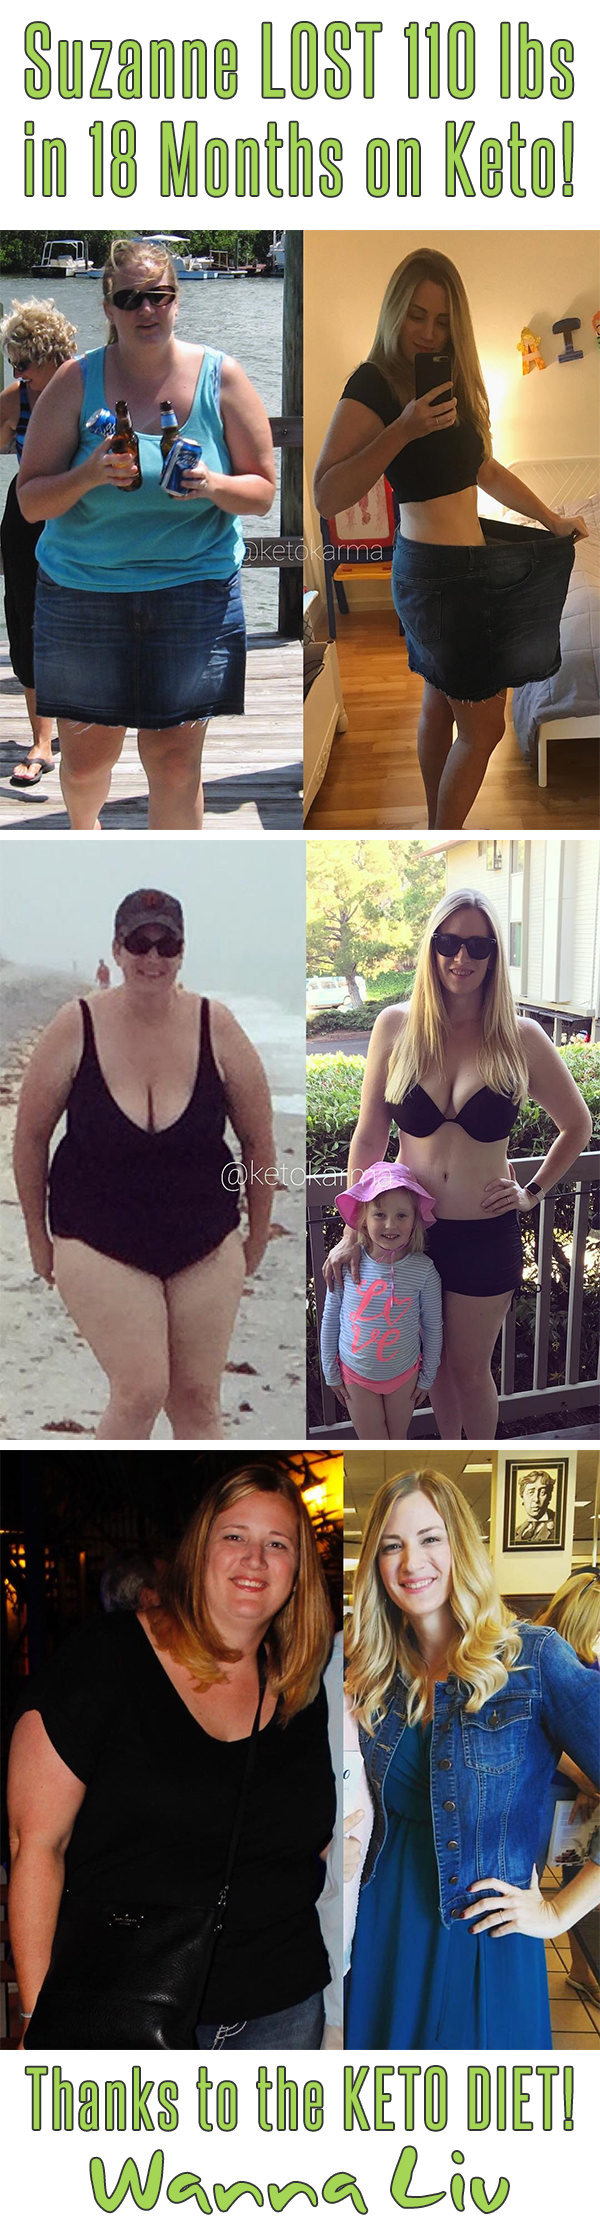 Suzanne LOST 110 lbs in 18 Months on Keto! Thanks to the KETO DIET! - Keto Success Stories #5 via Wanna Liv